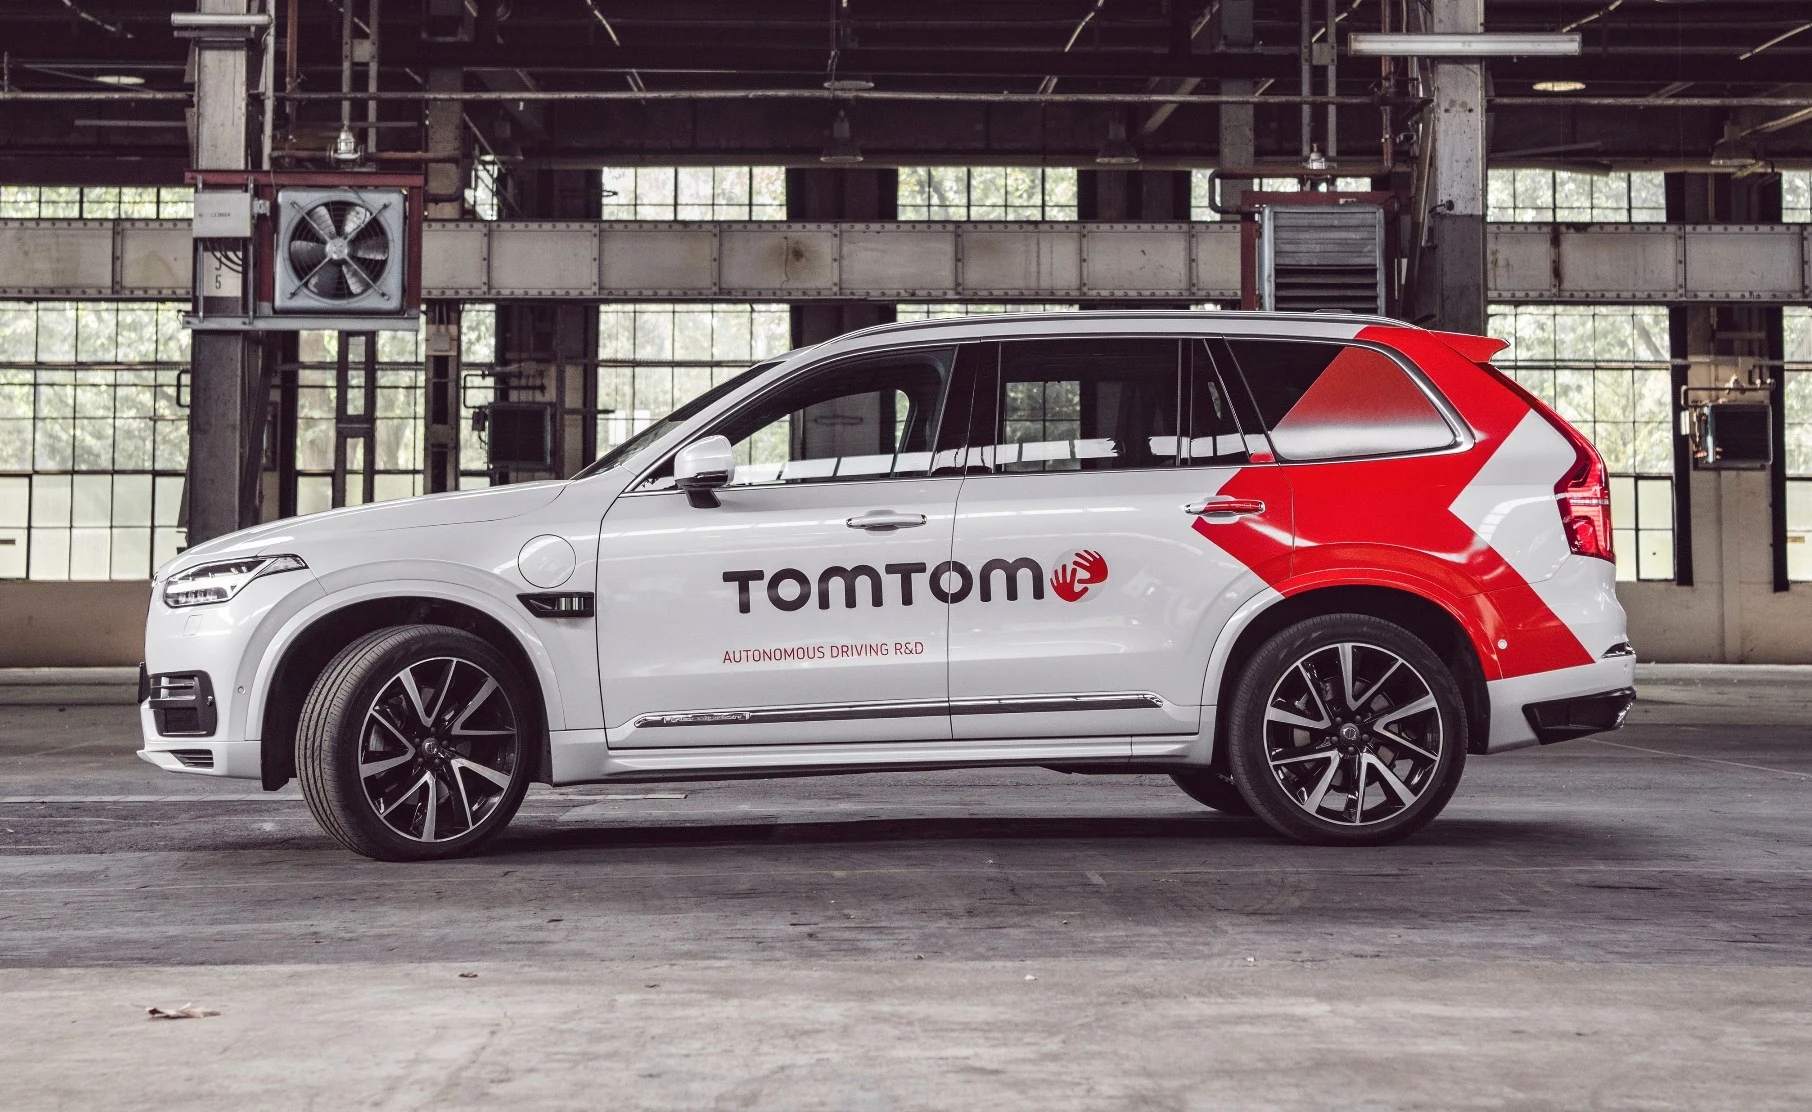 TomTom launches a fully autonomous test car to develop HD maps